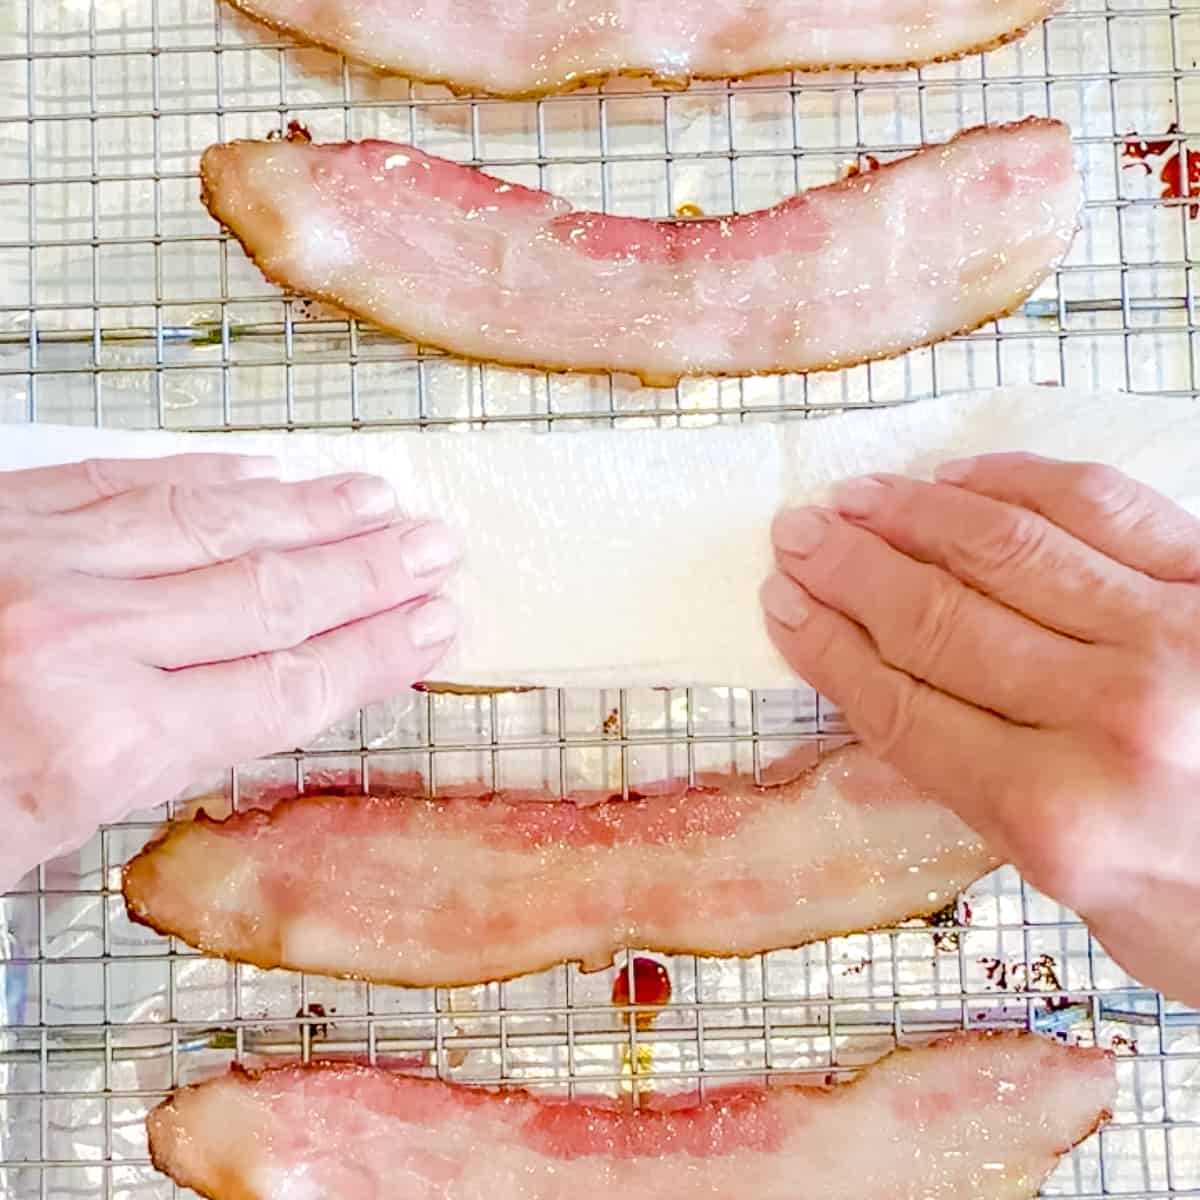 Blotting grease off of bacon with paper towel.